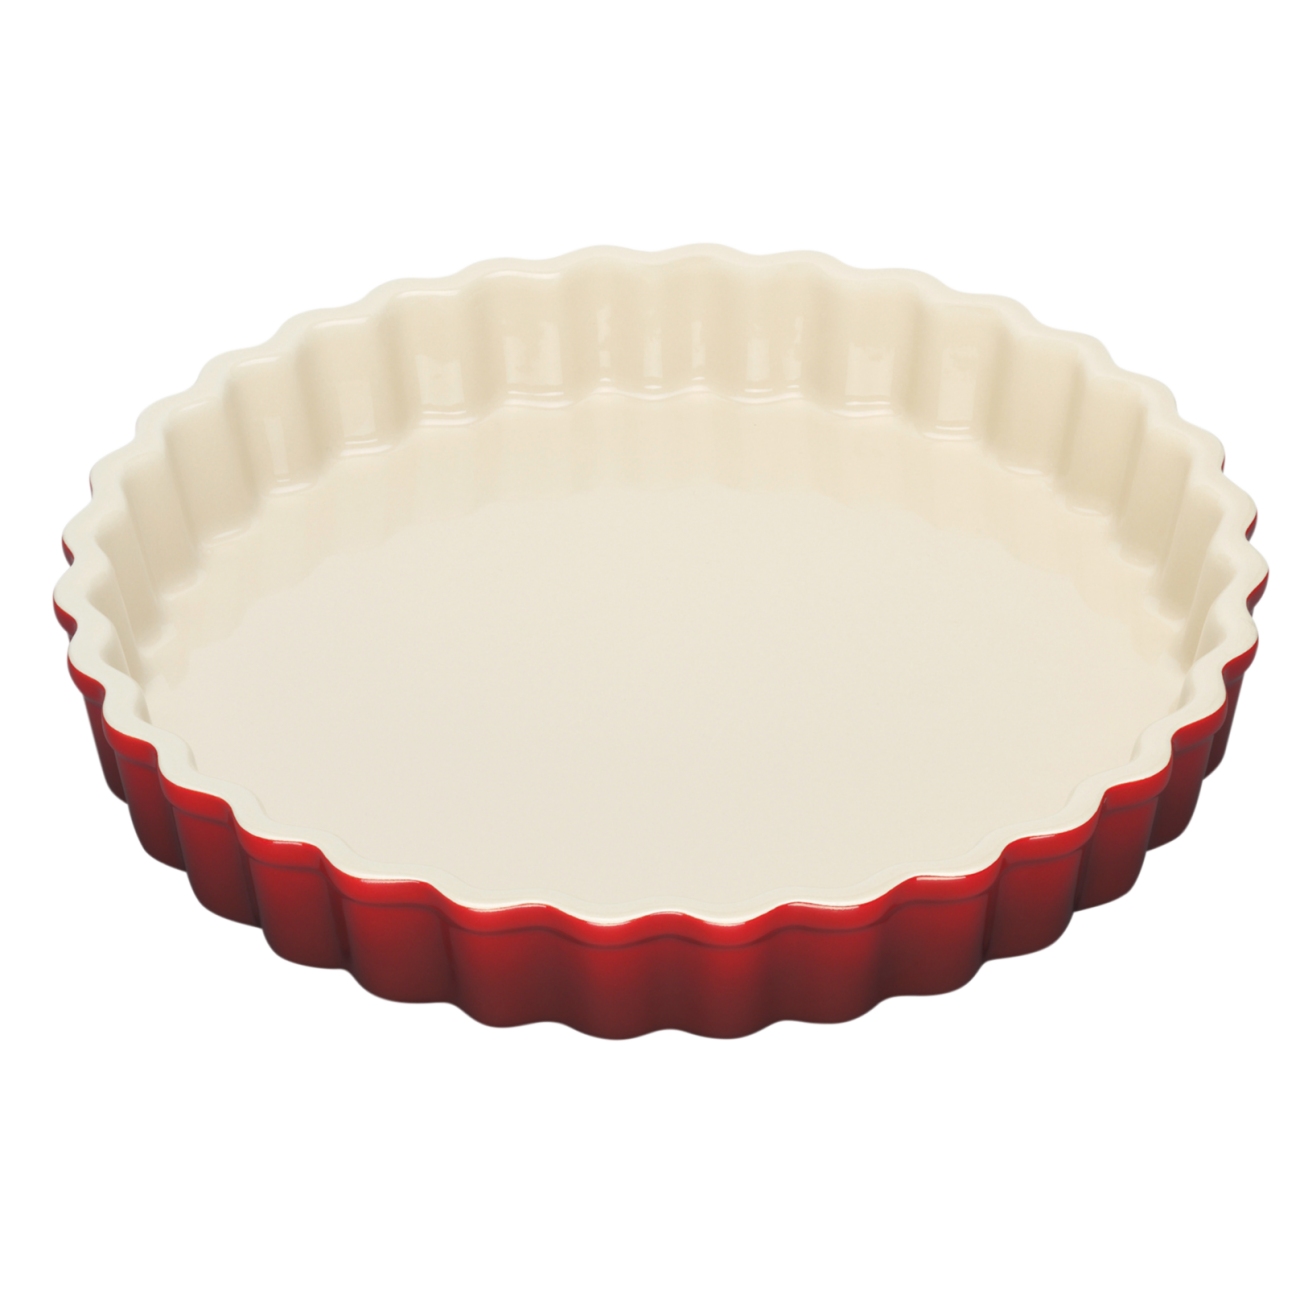 Le Creuset Cake Tradition 24 cherry